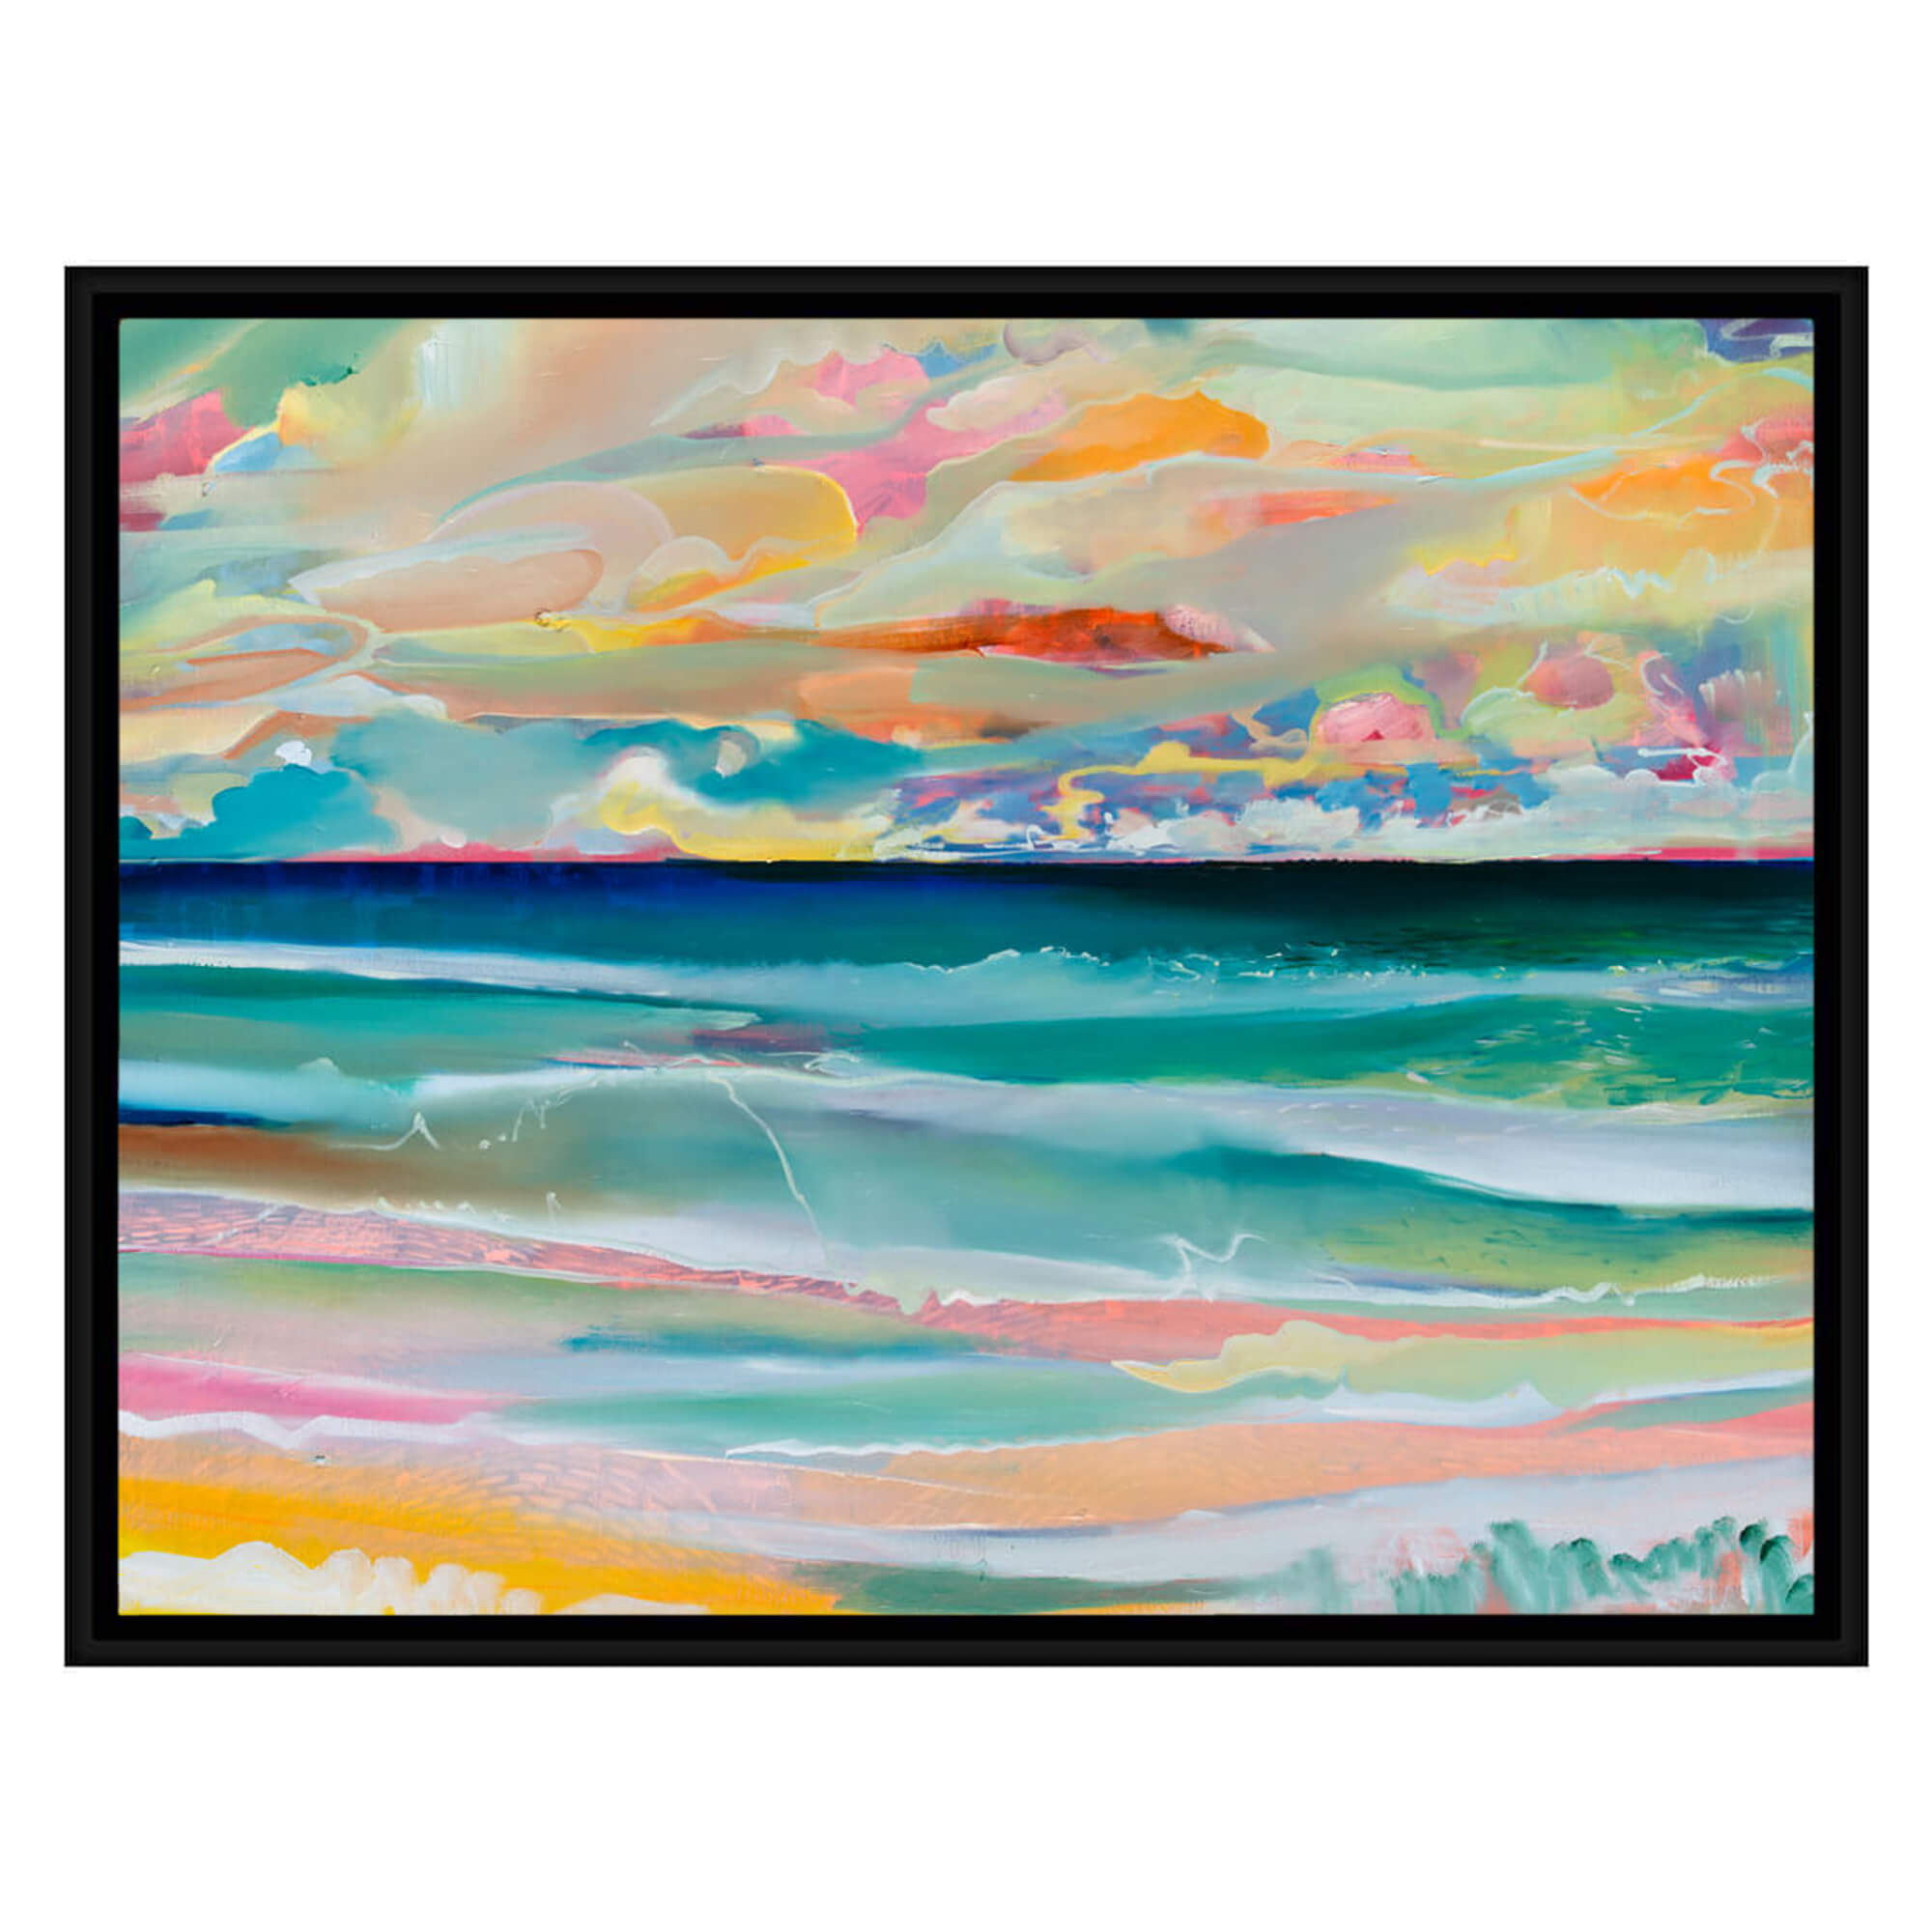 Framed canvas art print of an abstract artwork of a seascape with pink, yellow and teal hues by Hawaii artist Saumolia Puapuaga 